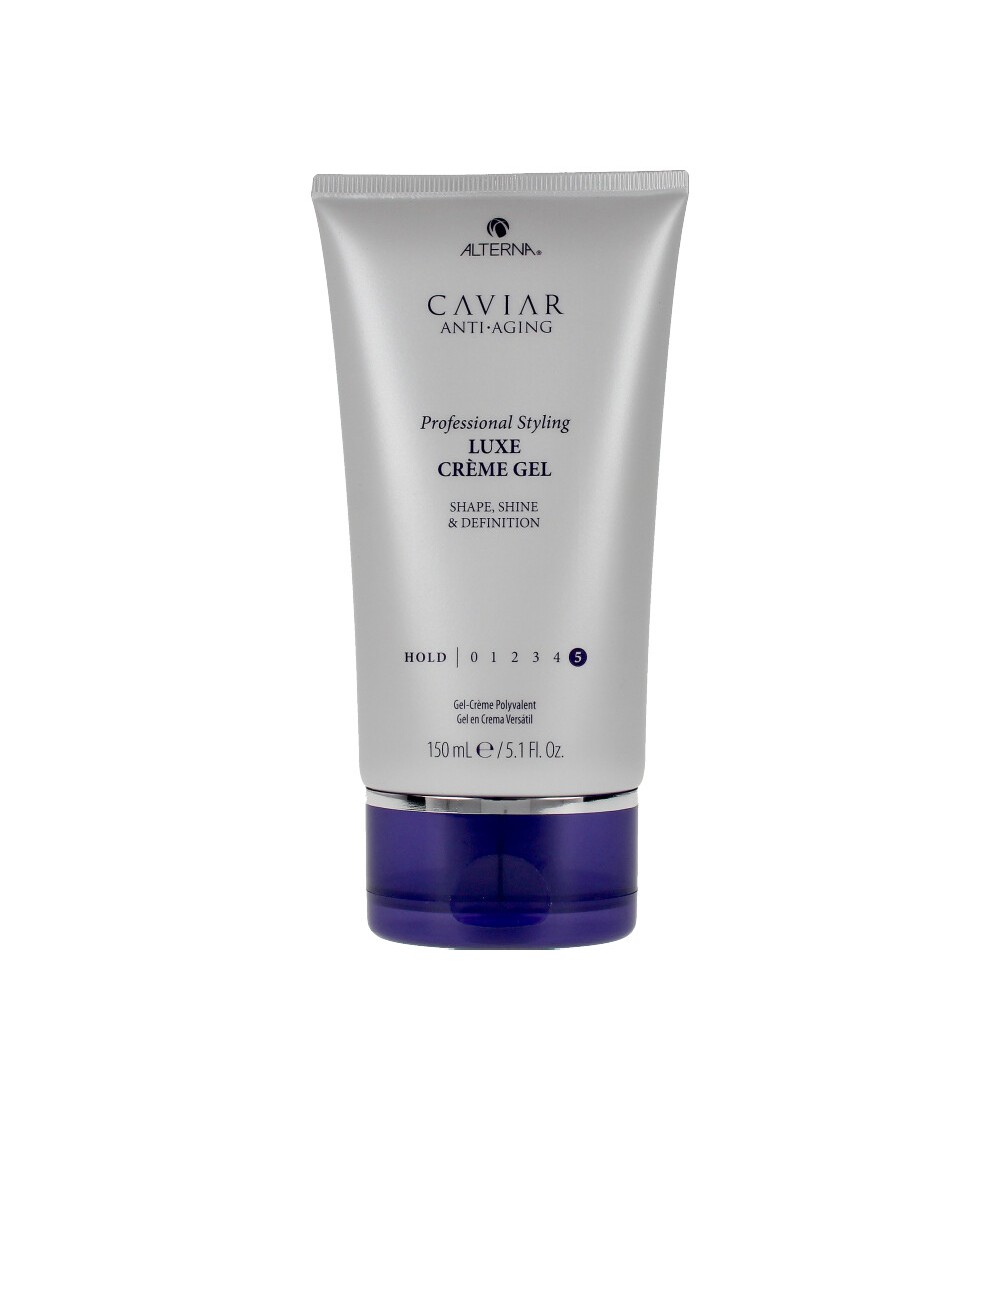 CAVIAR PROFESSIONAL STYLING luxe crème gel 150 ml